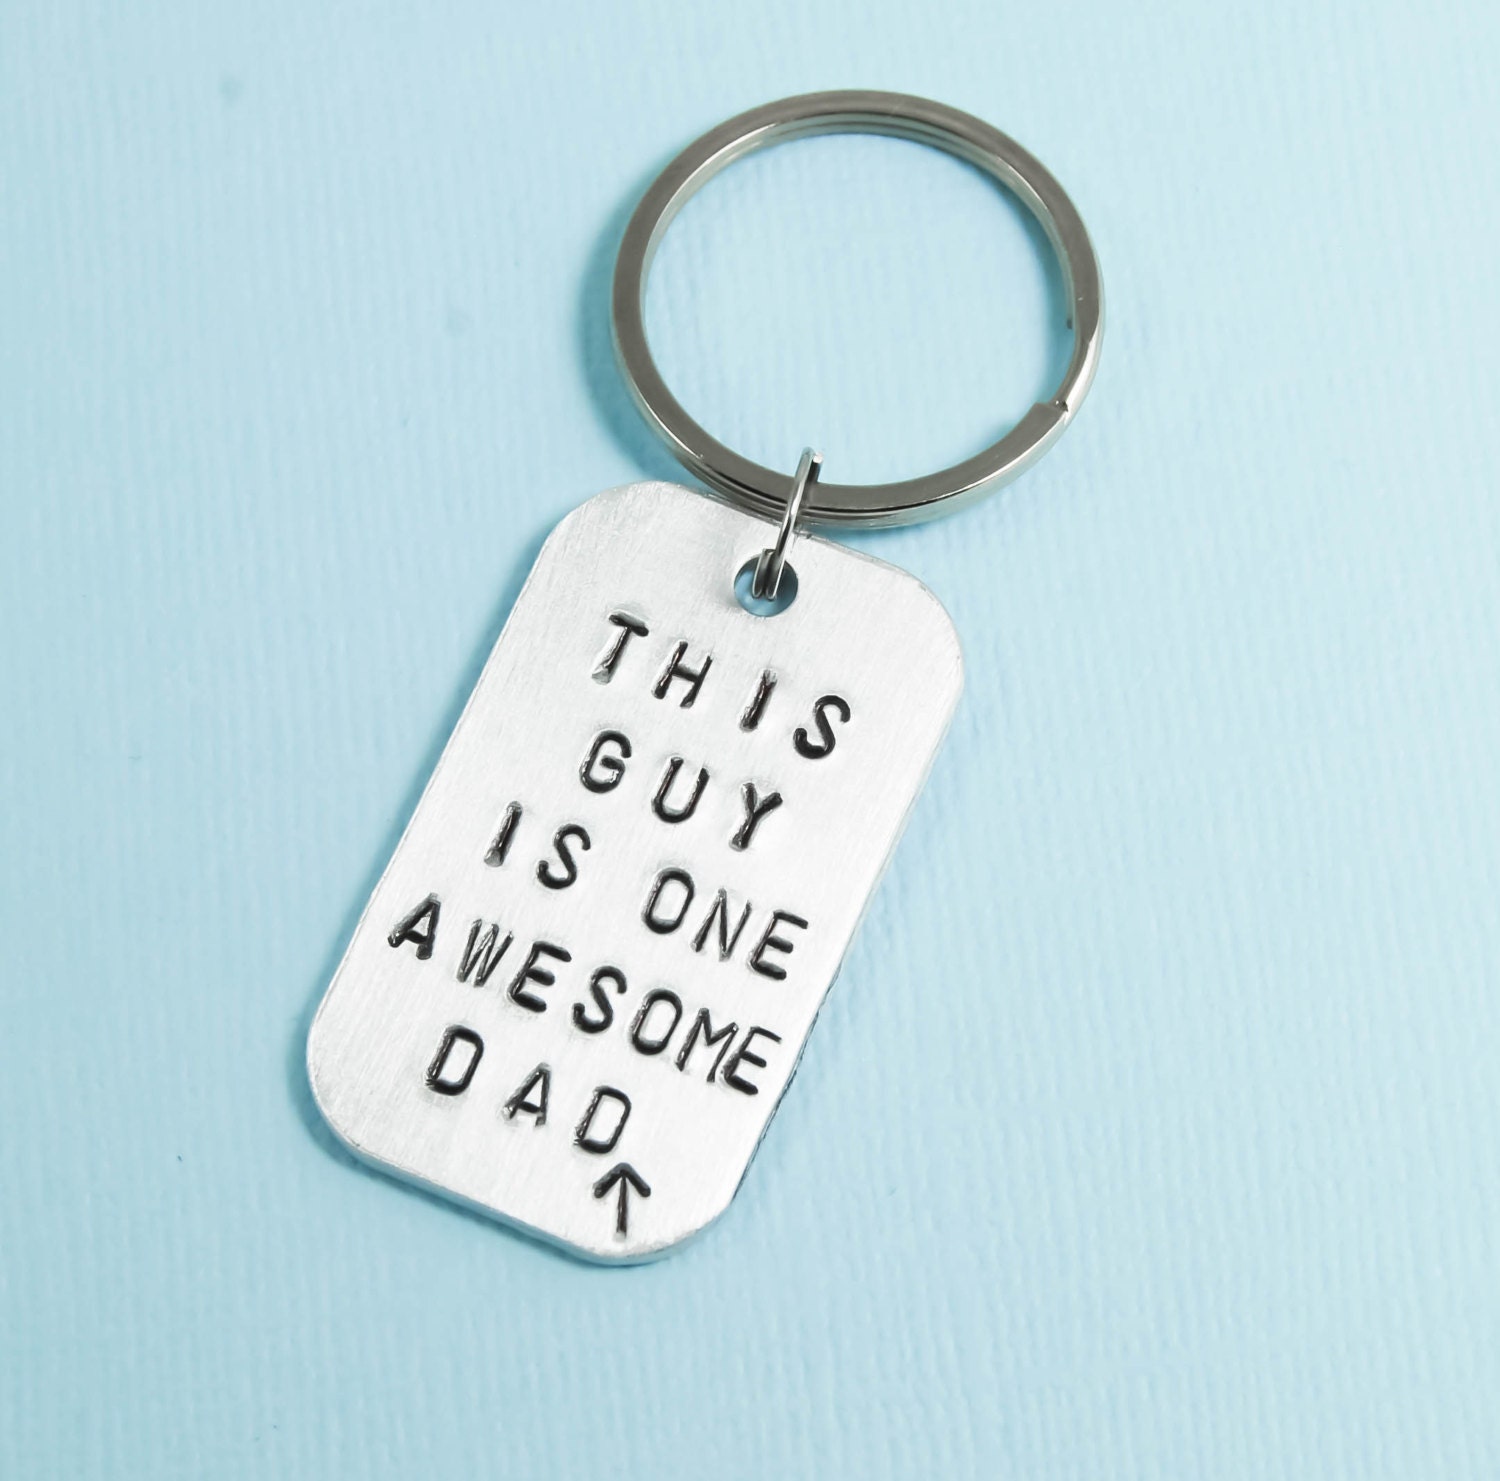 Dad Unique gifts Dad GiftsKeychain for Dad Cute keychain